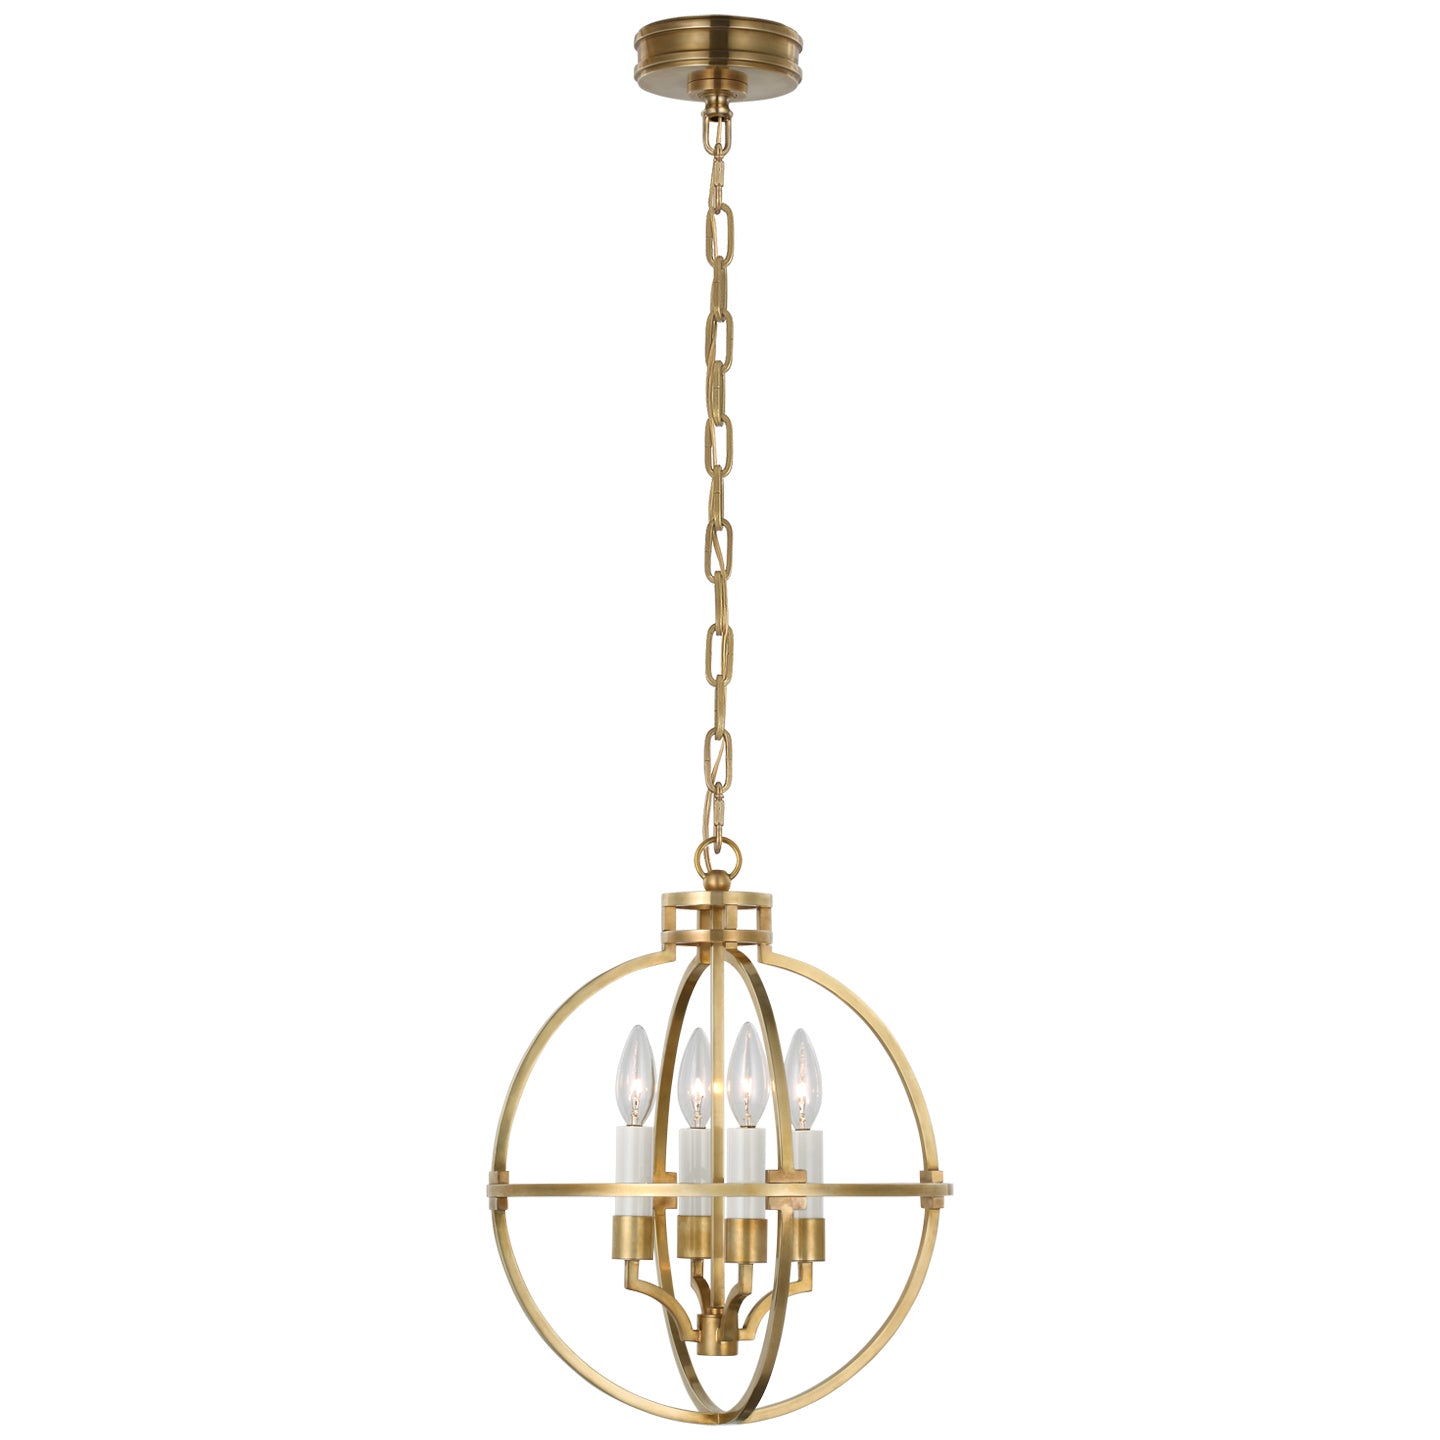 Load image into Gallery viewer, Visual Comfort Signature - CHC 5515AB - LED Lantern - Lexie - Antique-Burnished Brass
